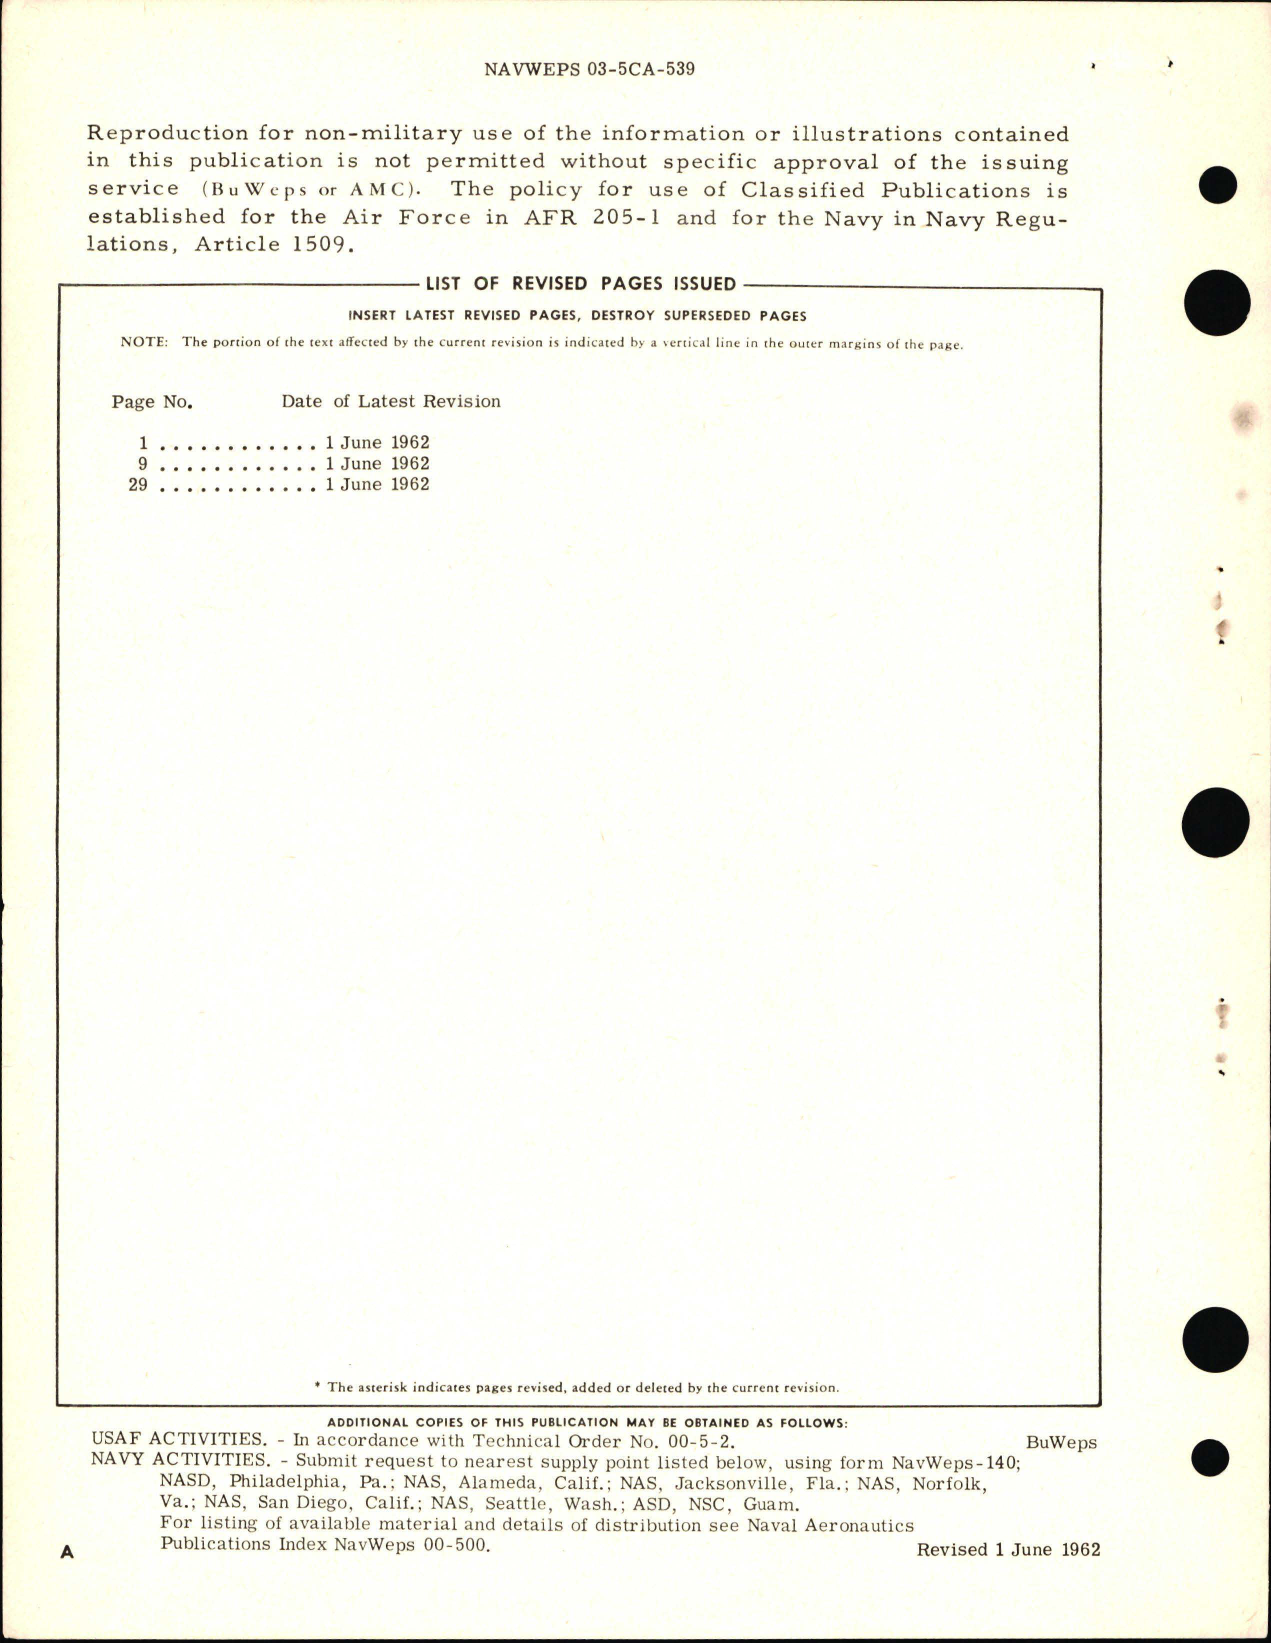 Sample page 6 from AirCorps Library document: Operation and Maintenance Instructions for Aircraft Engine Starters Type AN4116 Series